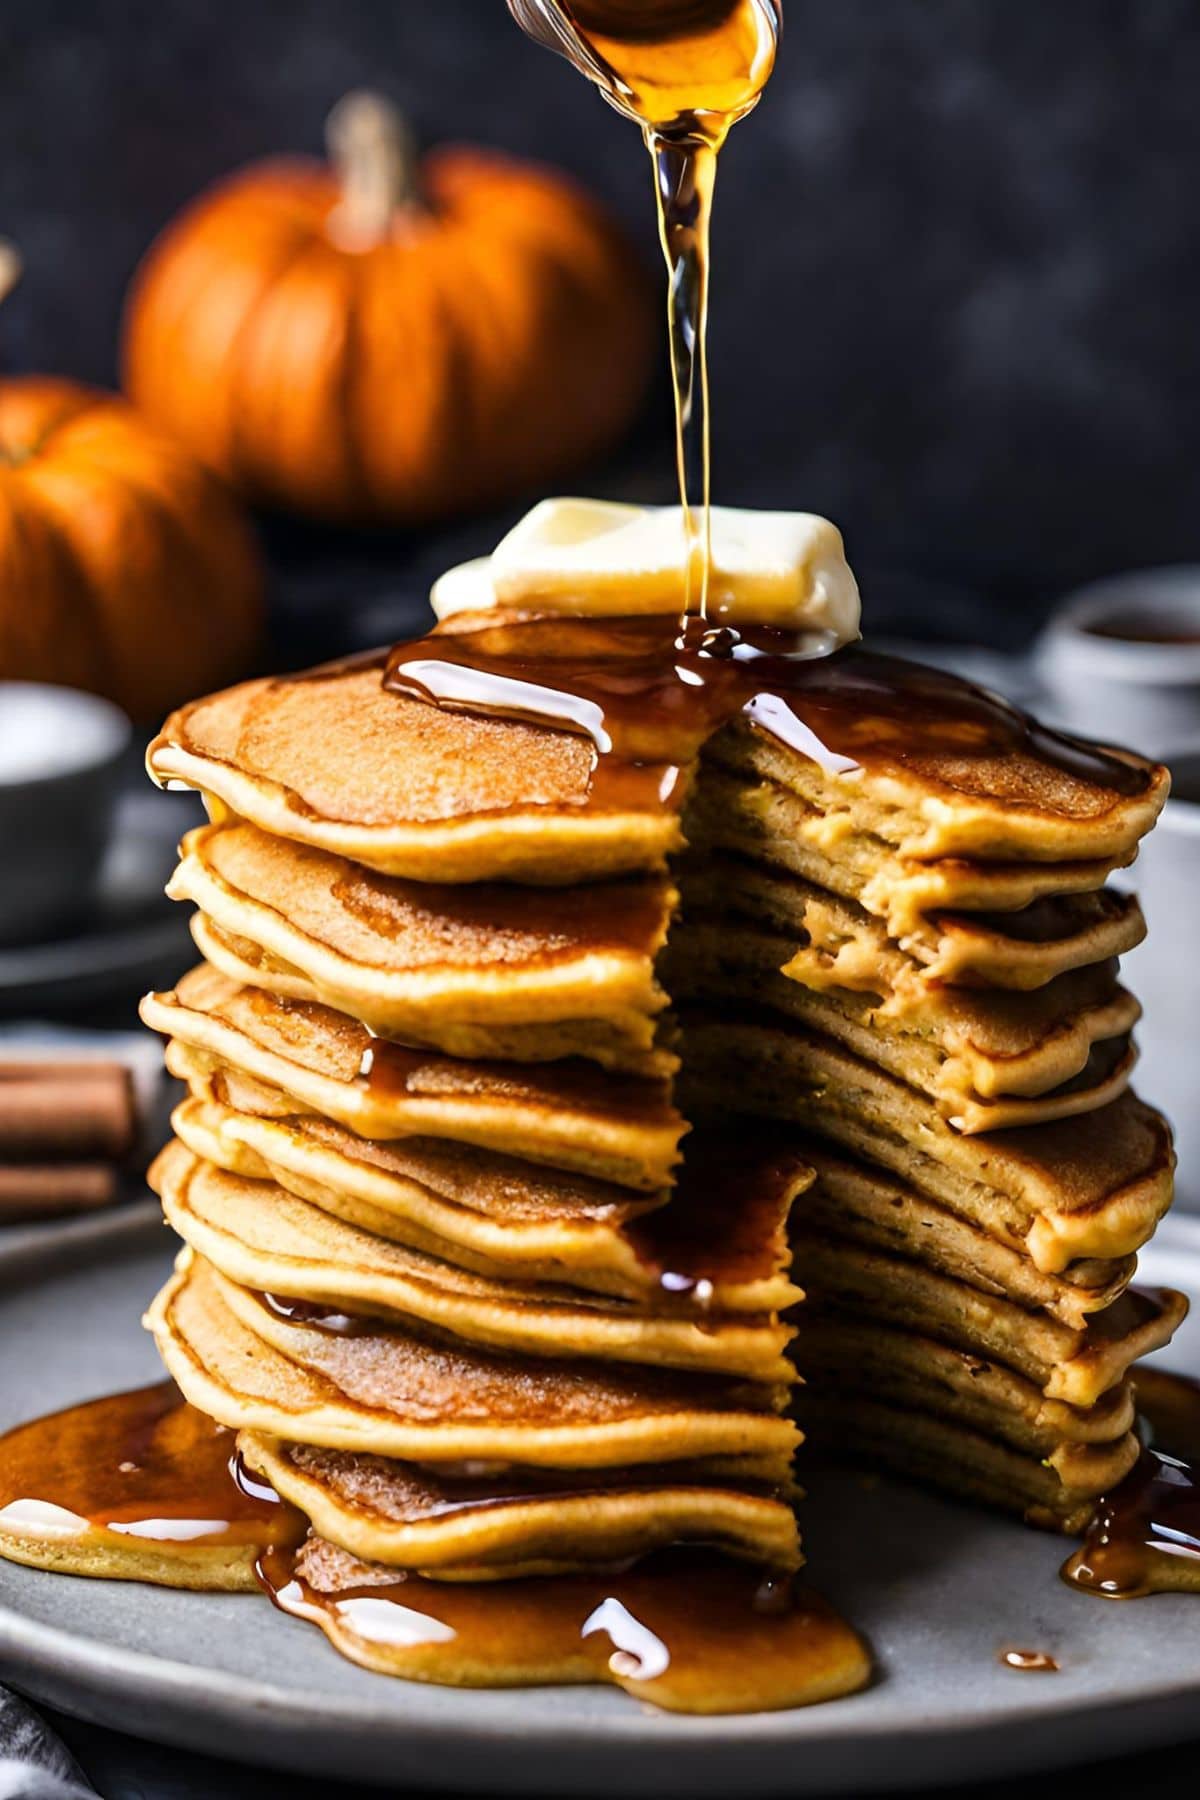 These fluffy pumpkin pancakes are perfect for cozy fall weekend mornings. Loaded with pumpkin and warming spices, they are nourishing, flavorful and comforting. Vegan-adaptable and GF-adaptable!